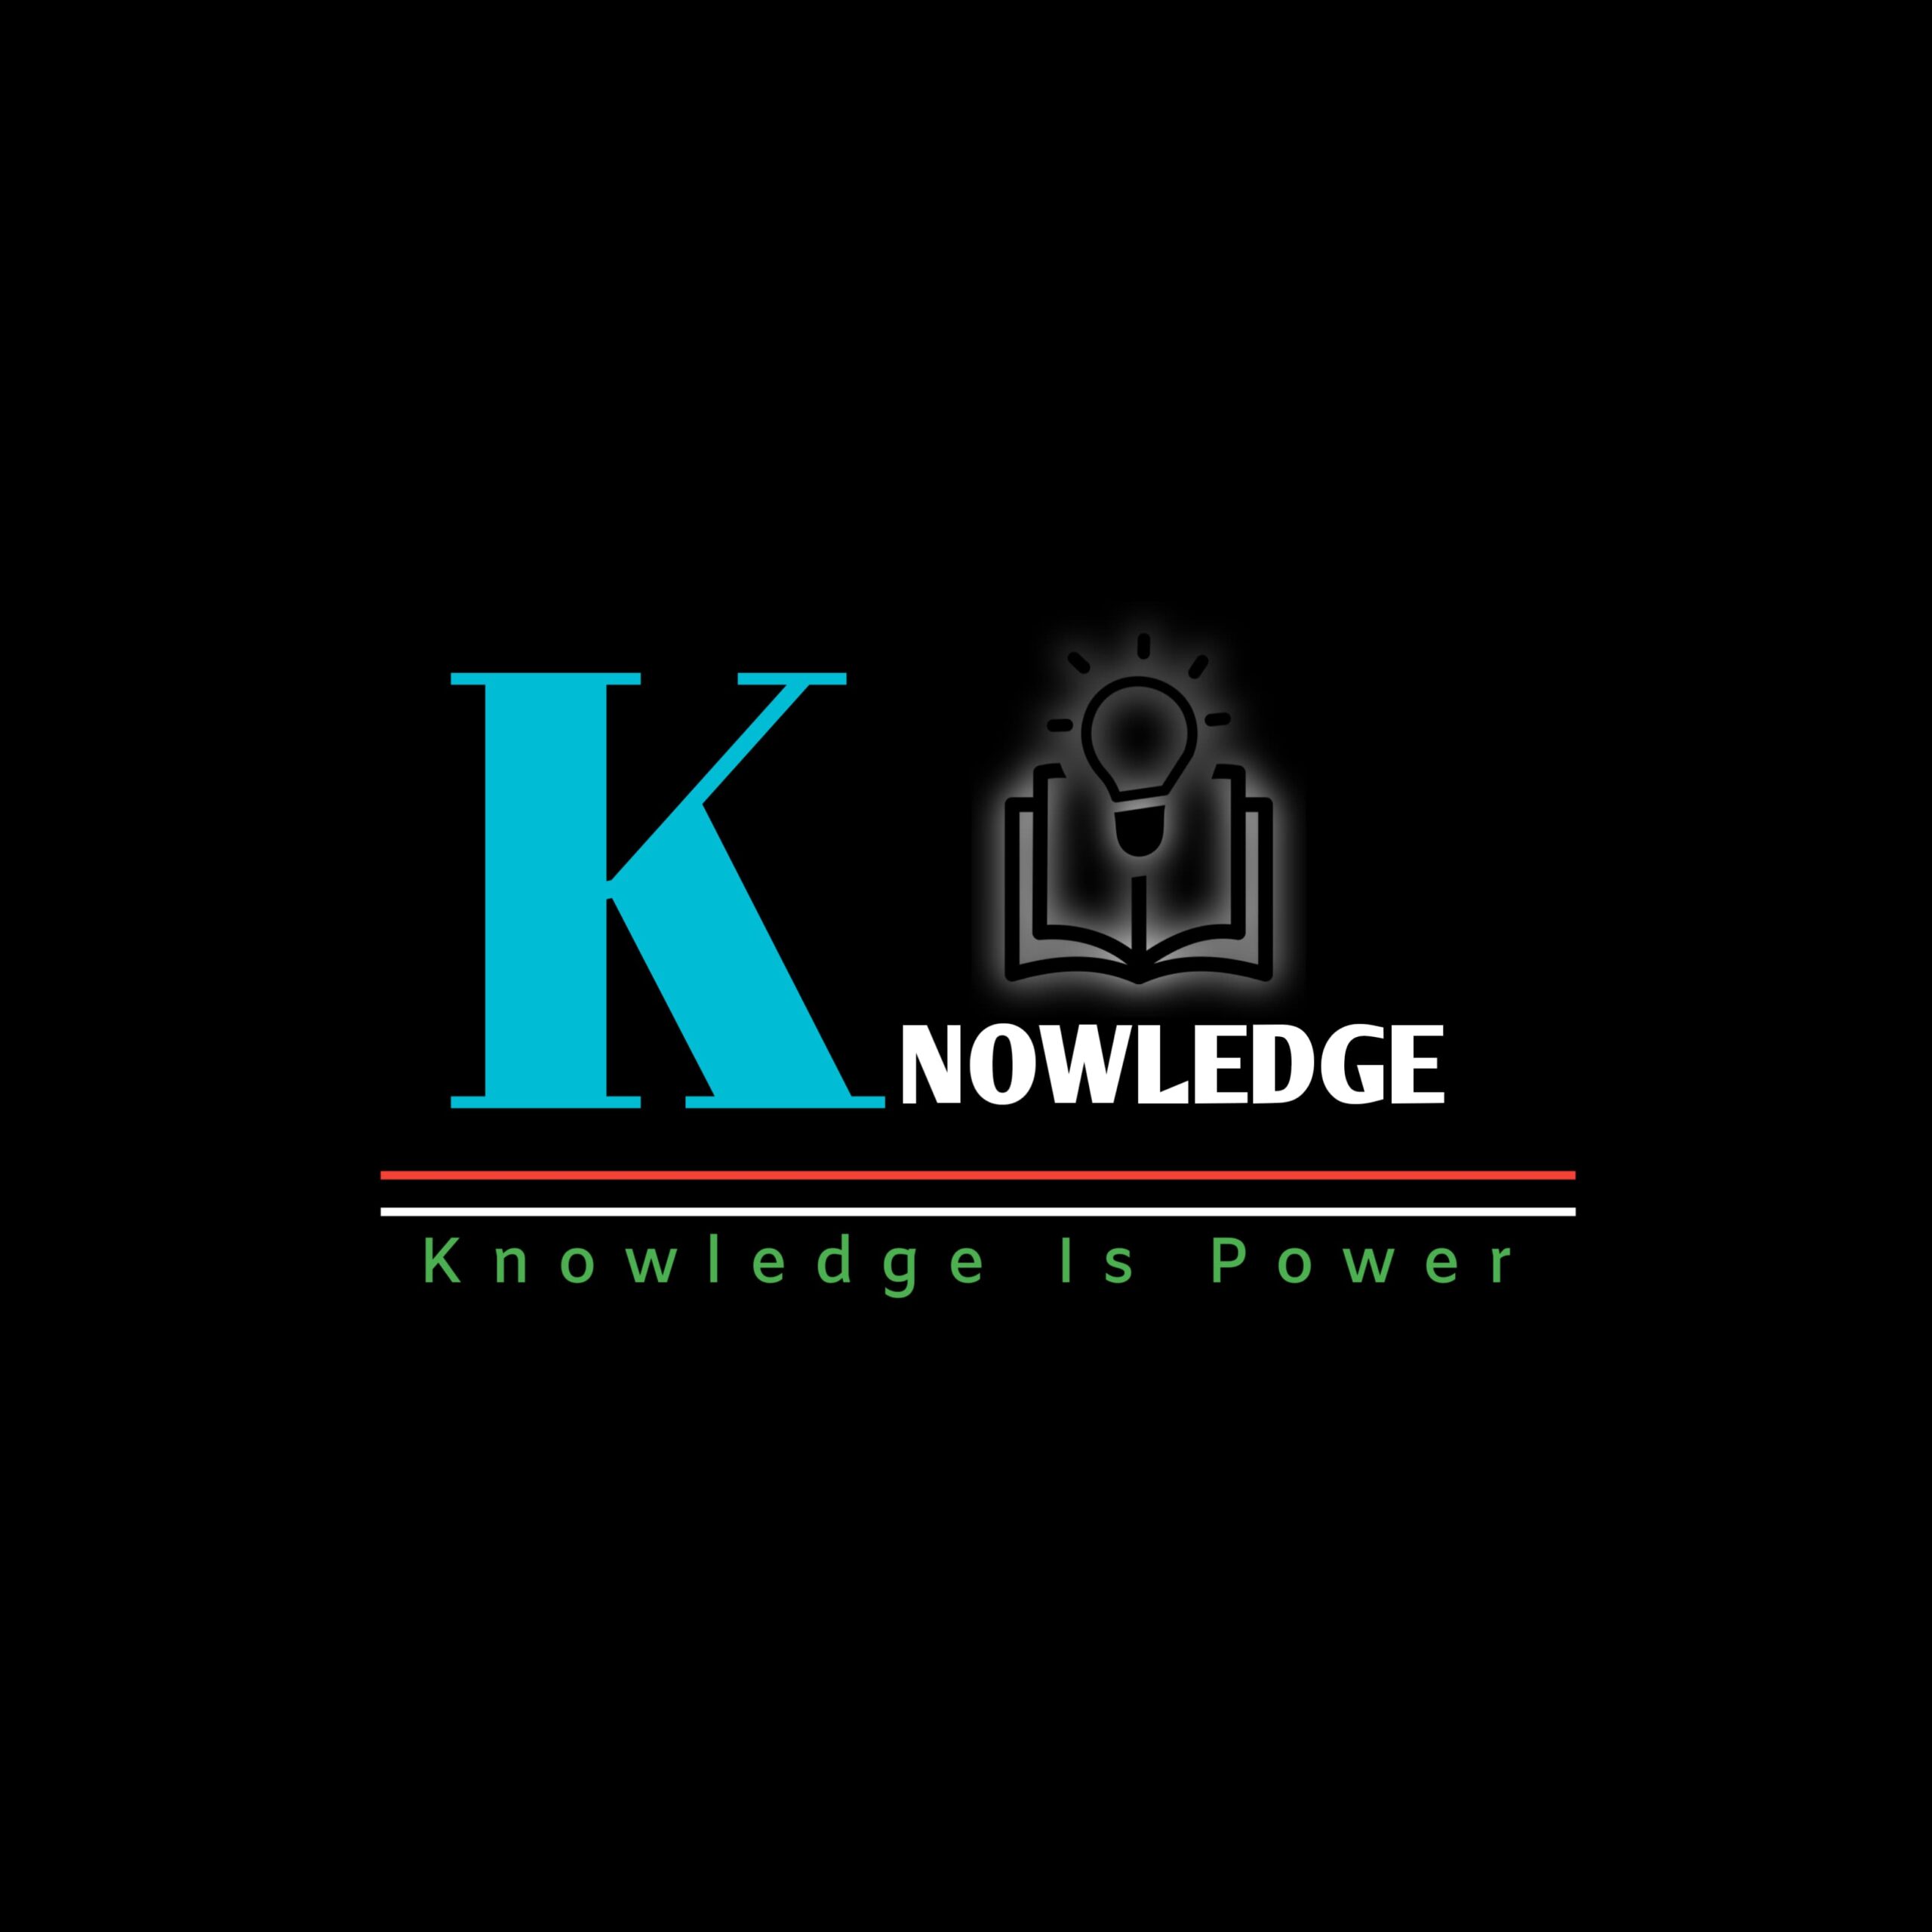 knowledge.org.in